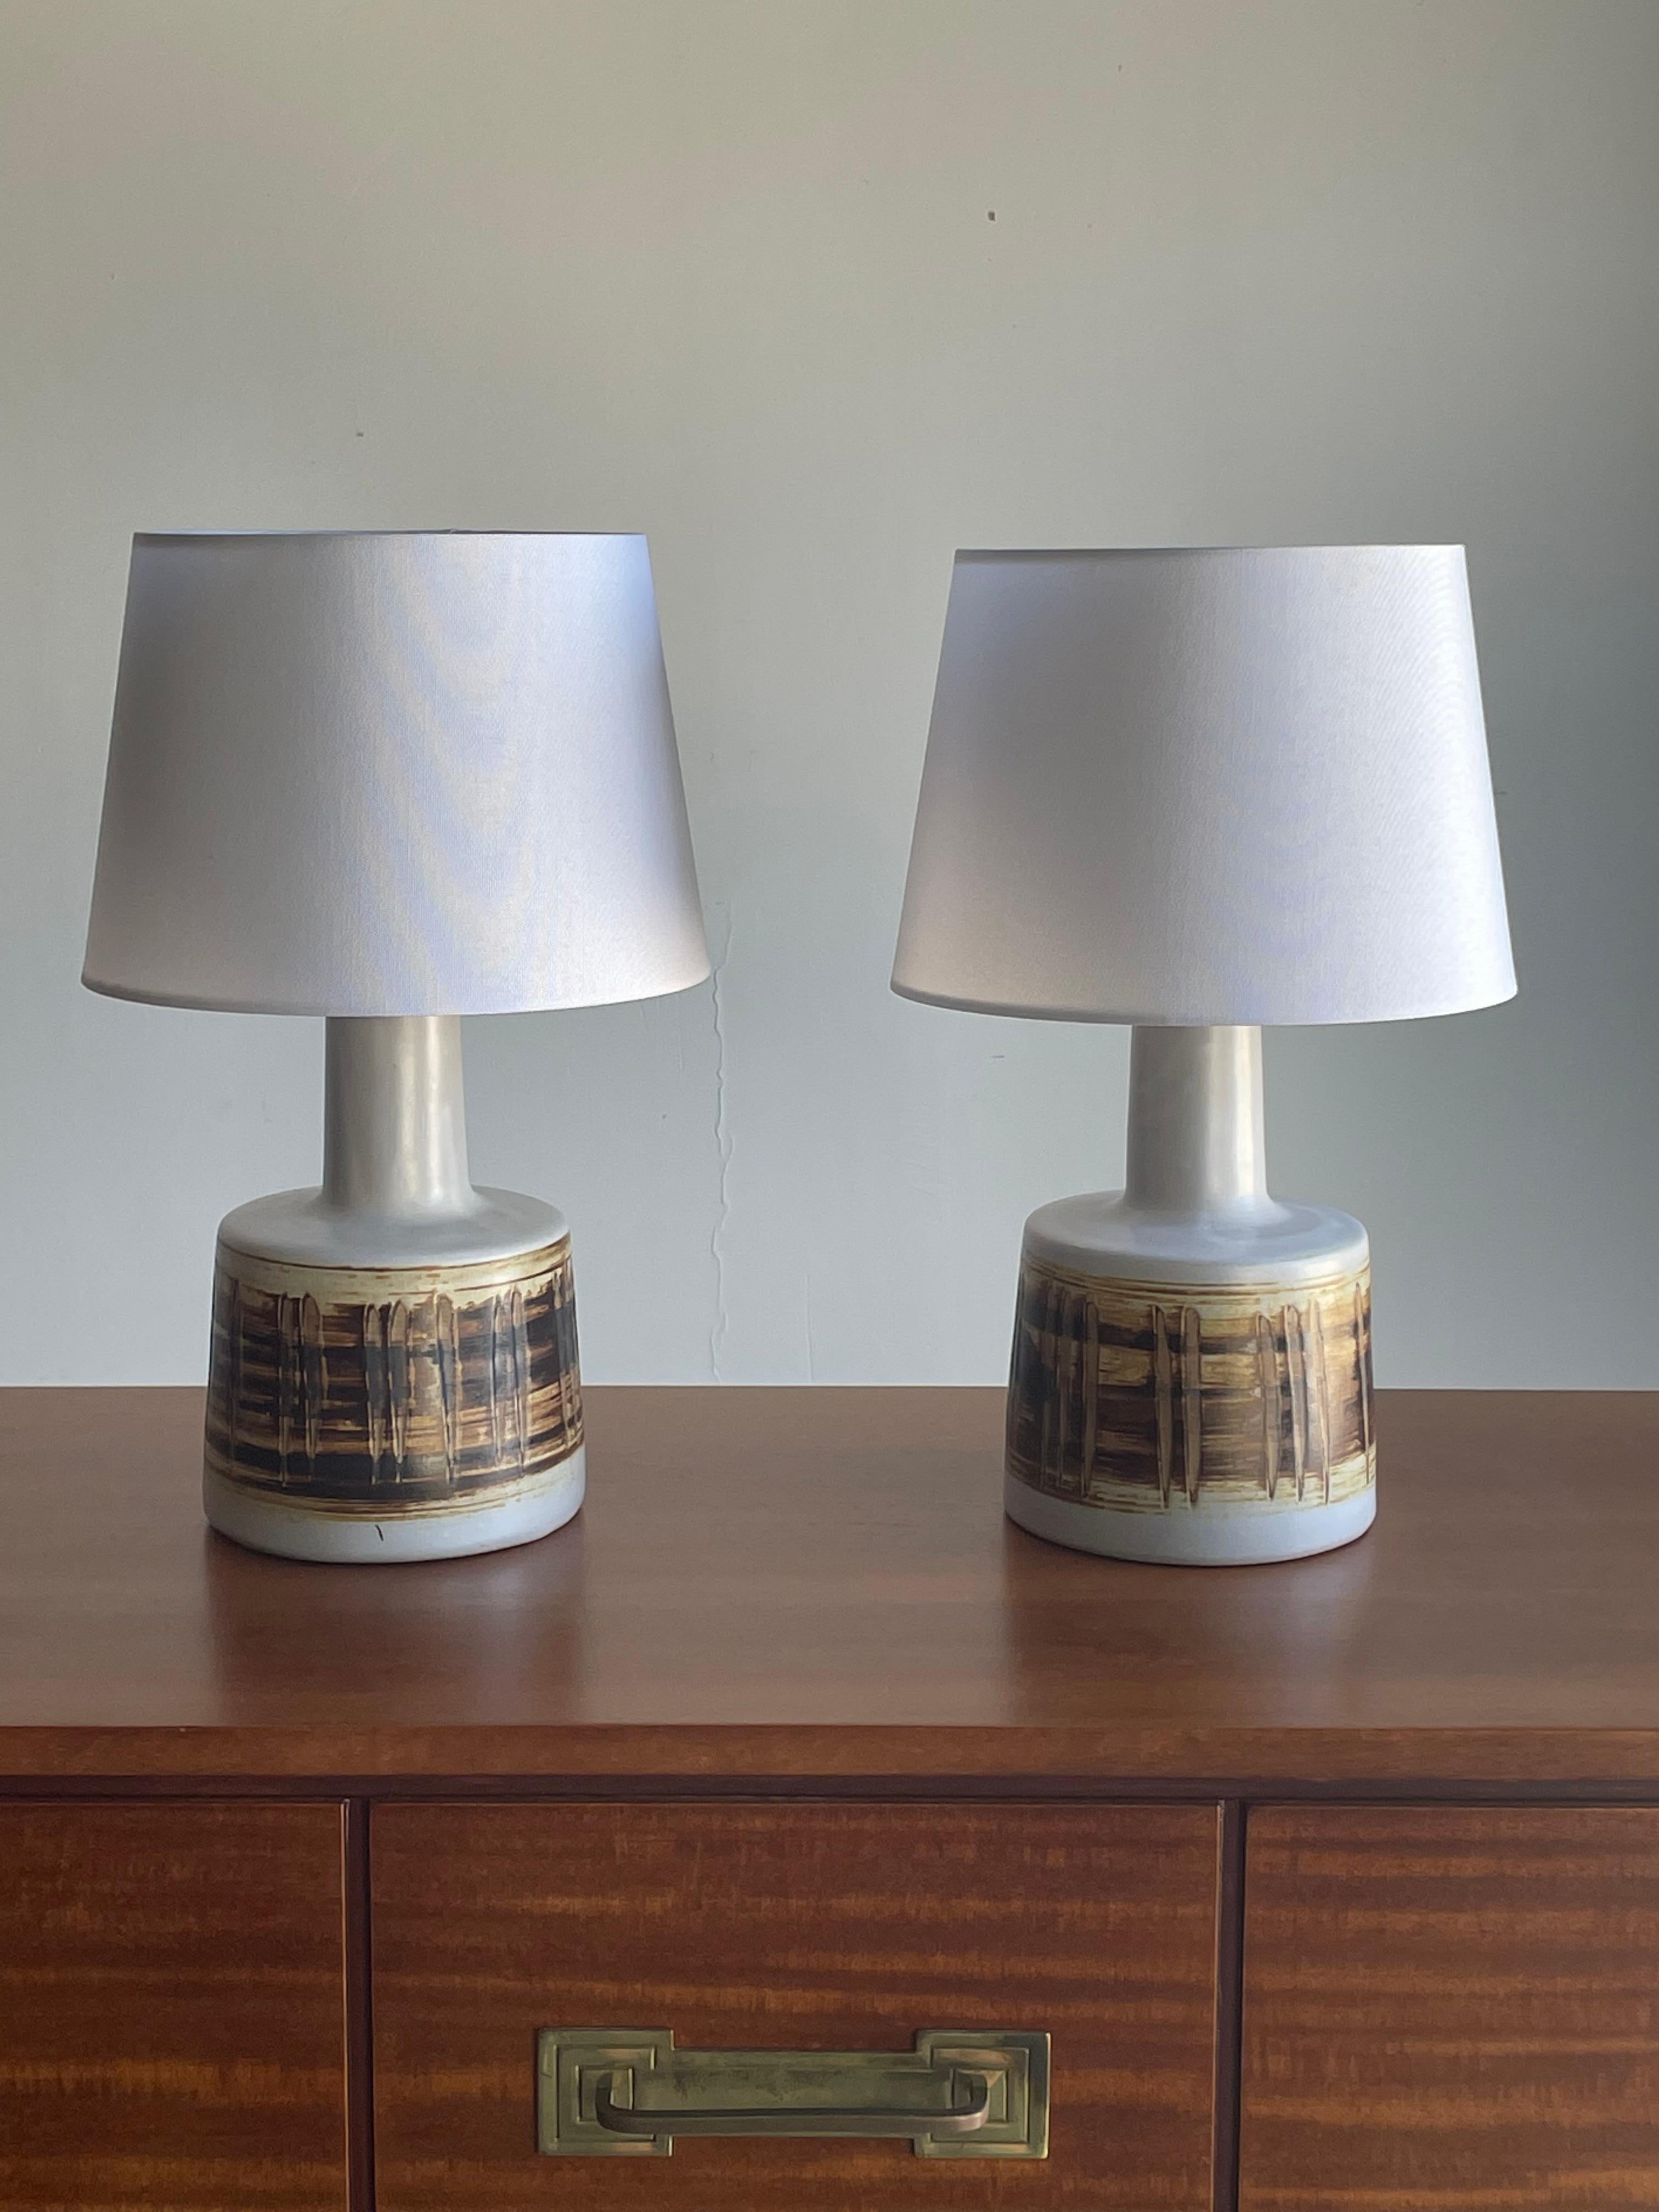 Pair of table lamps by famed ceramicist duo Jane and Gordon Martz for Marshall Studios. Yellow and brown color palette to the ceramic body.

Martz pair 
Overall
16” tall 
10” wide.

Ceramic 
9.25” tall
6” wide